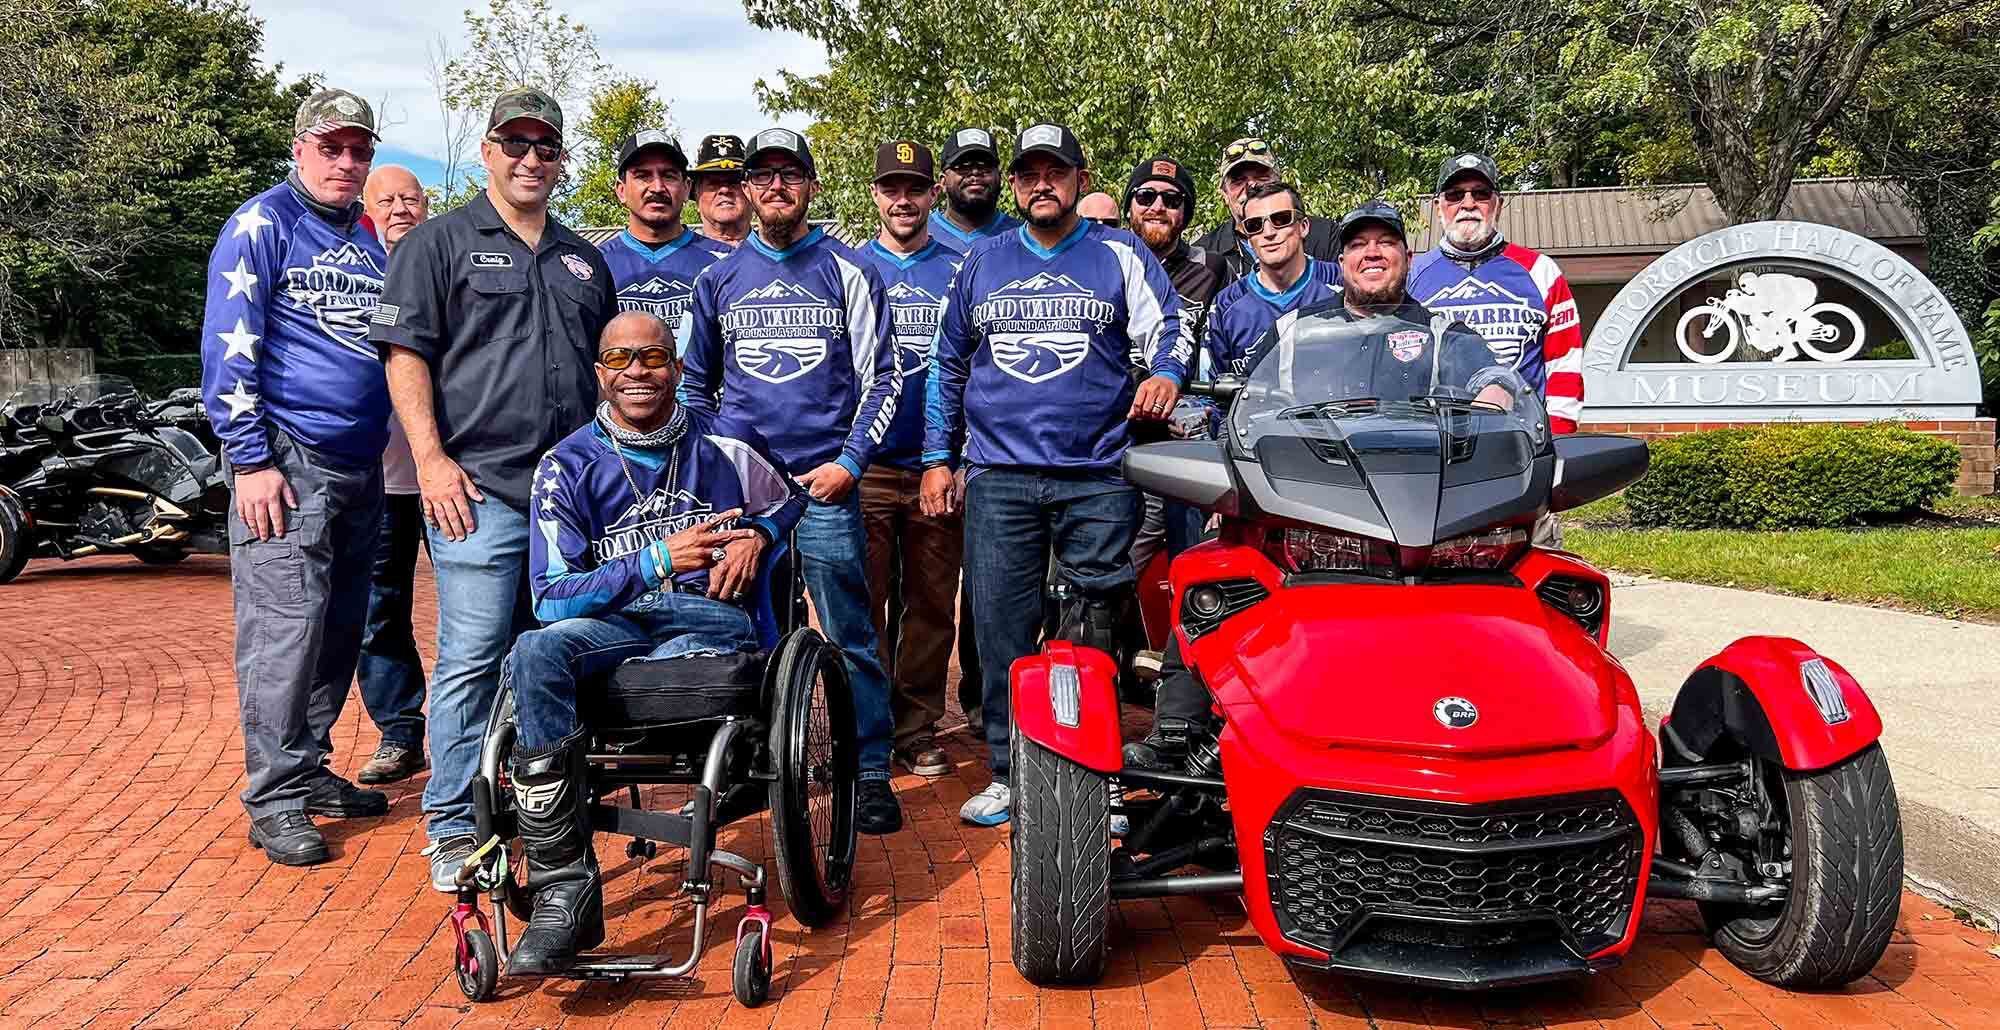 A view of the 2022 Can-Am & Road Warrior Foundation (RWF) Adventure Therapy Ride. Media provided by Can-Am.